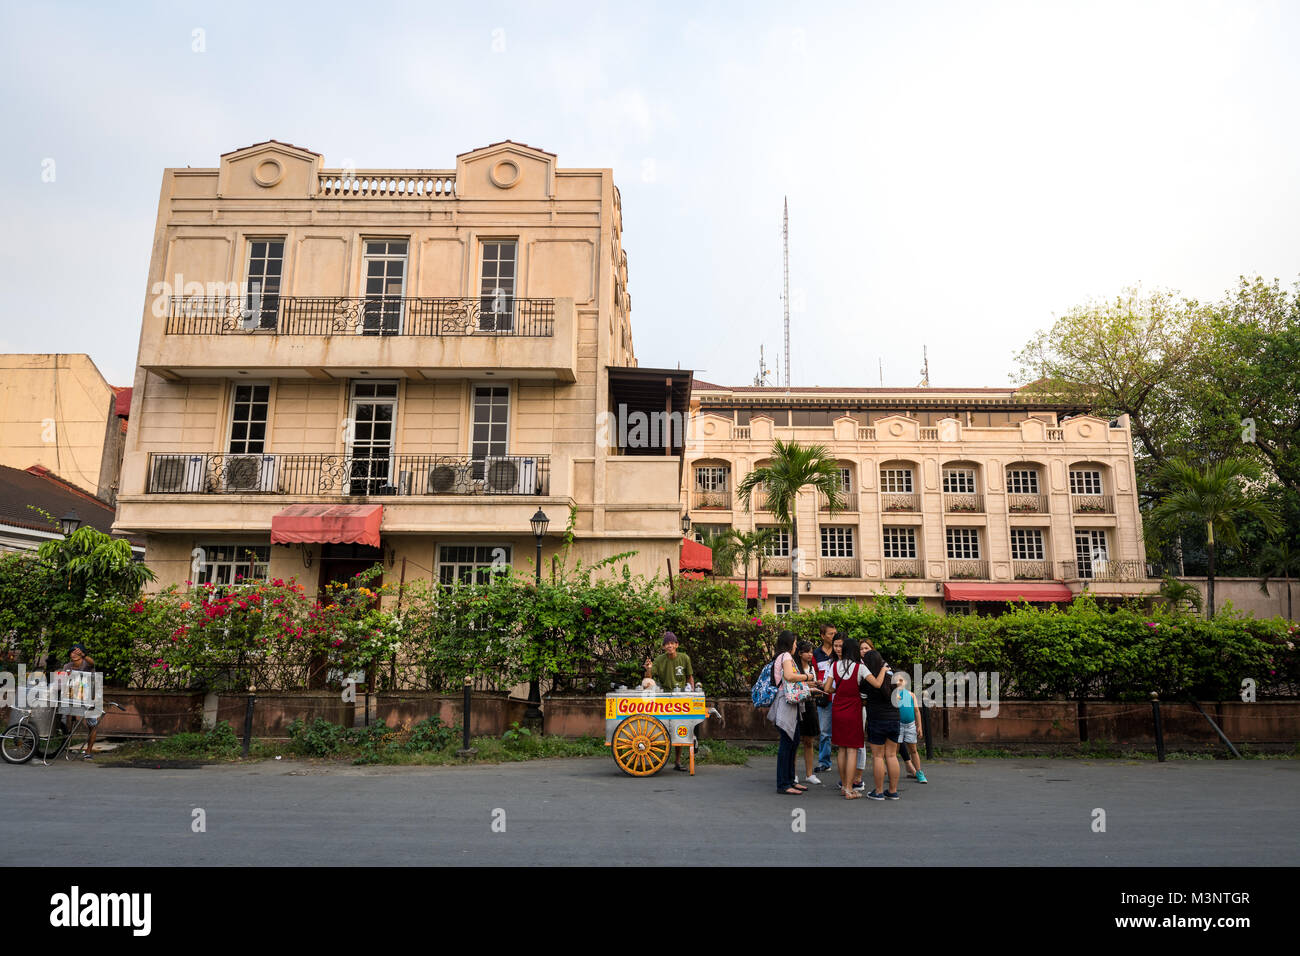 Manila, Philippines - Feb 10, 2018 : Historical building in front of Fort Santiago gate located in the Intramuros district of Manila, Philippines Stock Photo